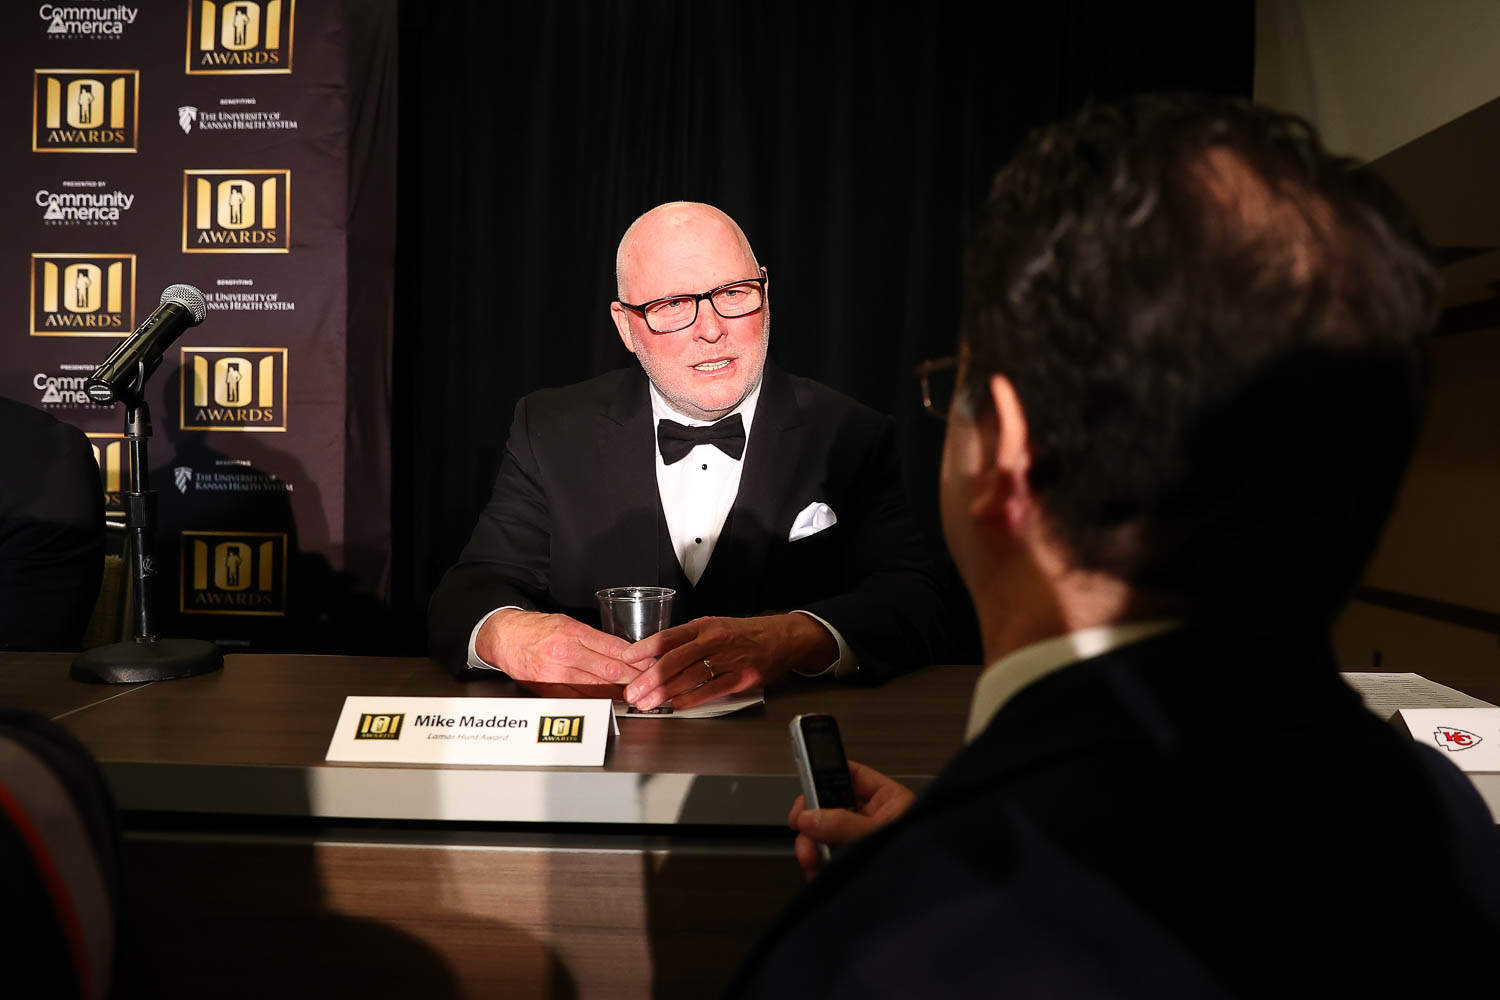 Lamar Hunt Award for Professional Football recipient Mike Madden (for the late John Madden) during the 53rd annual 101 Awards press conference at The Westin Crown Center in Kansas City, Missouri on Saturday, February 25, 2023.